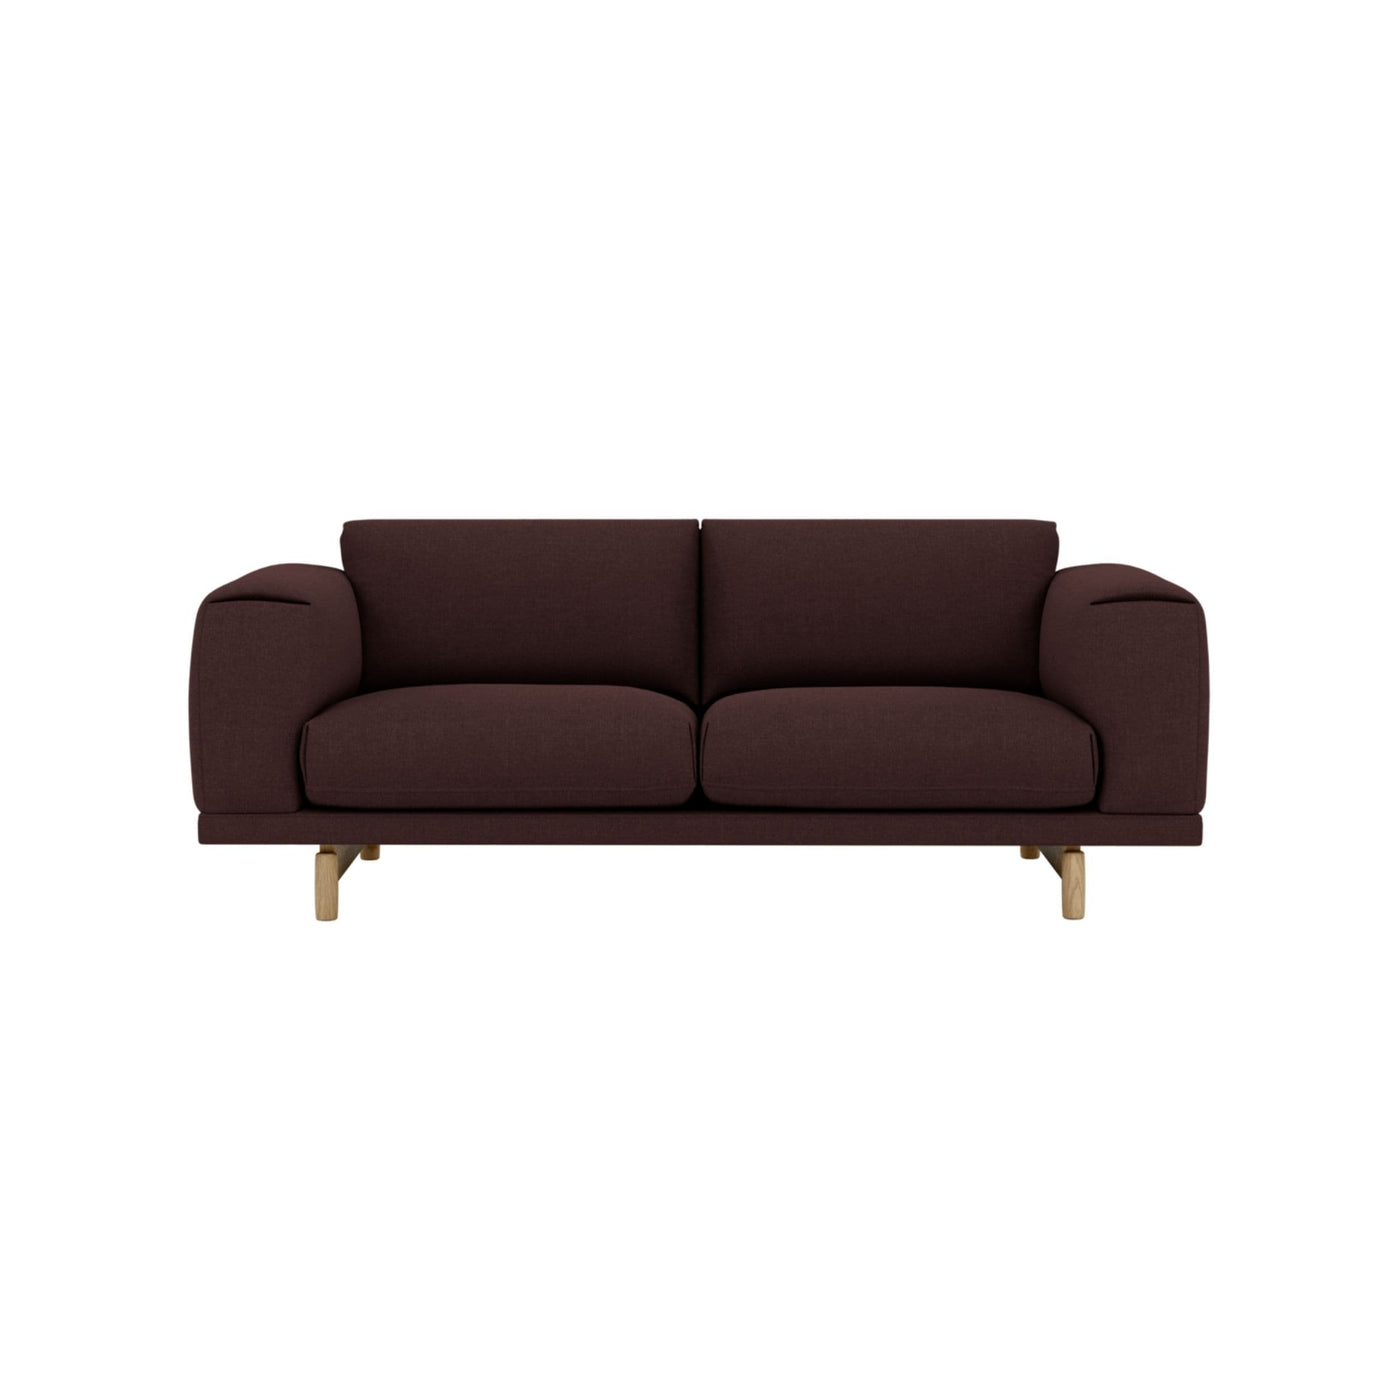 Muuto Rest Sofa 2 seater, available made to order from someday designs. #colour_remix-373-red